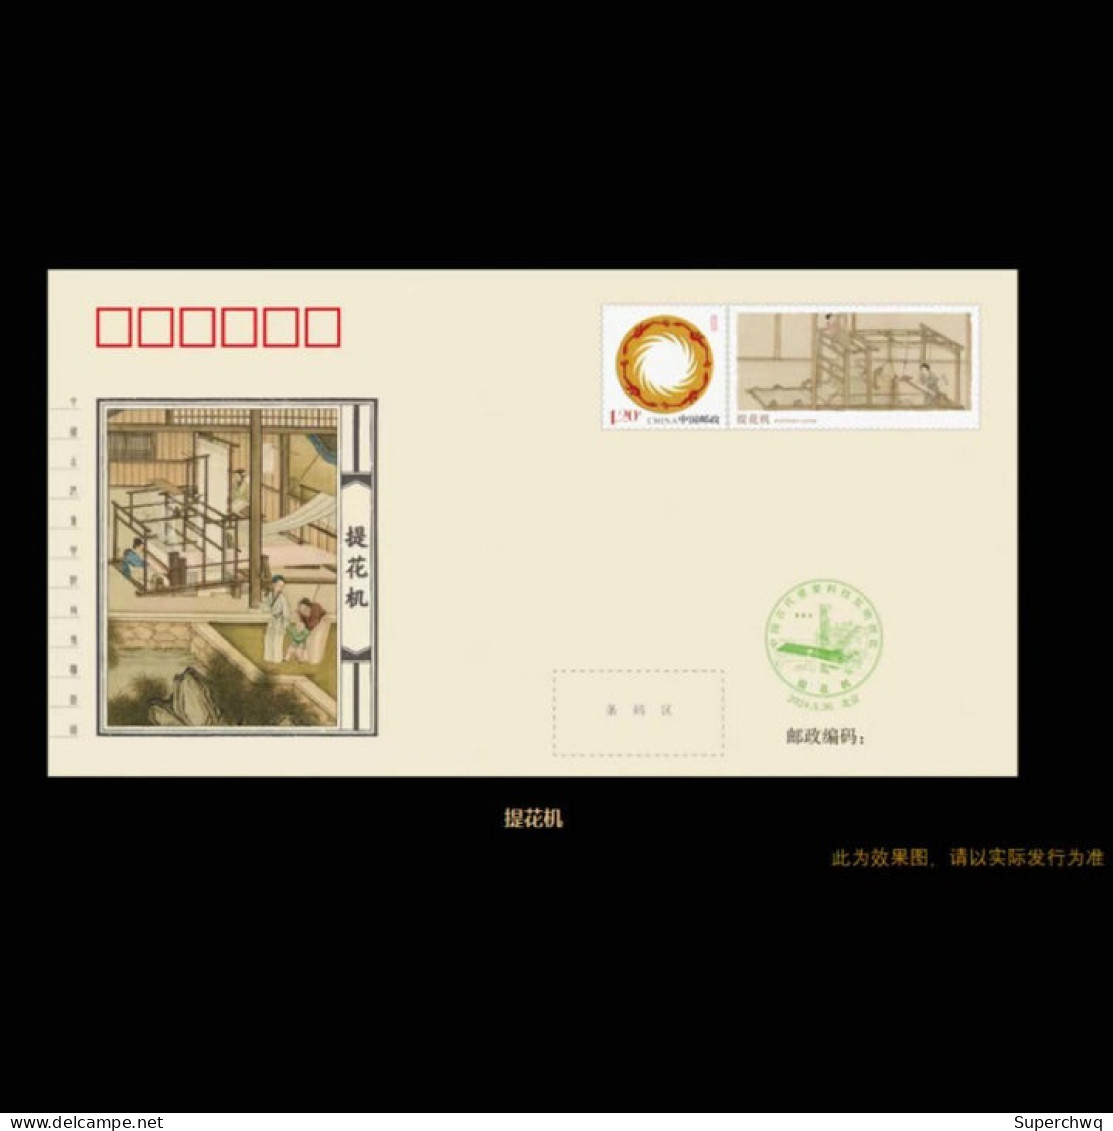 China cover The commemorative cover of "Qiaosi Tiangong - Important Scientific and Technological Inventions and Creation